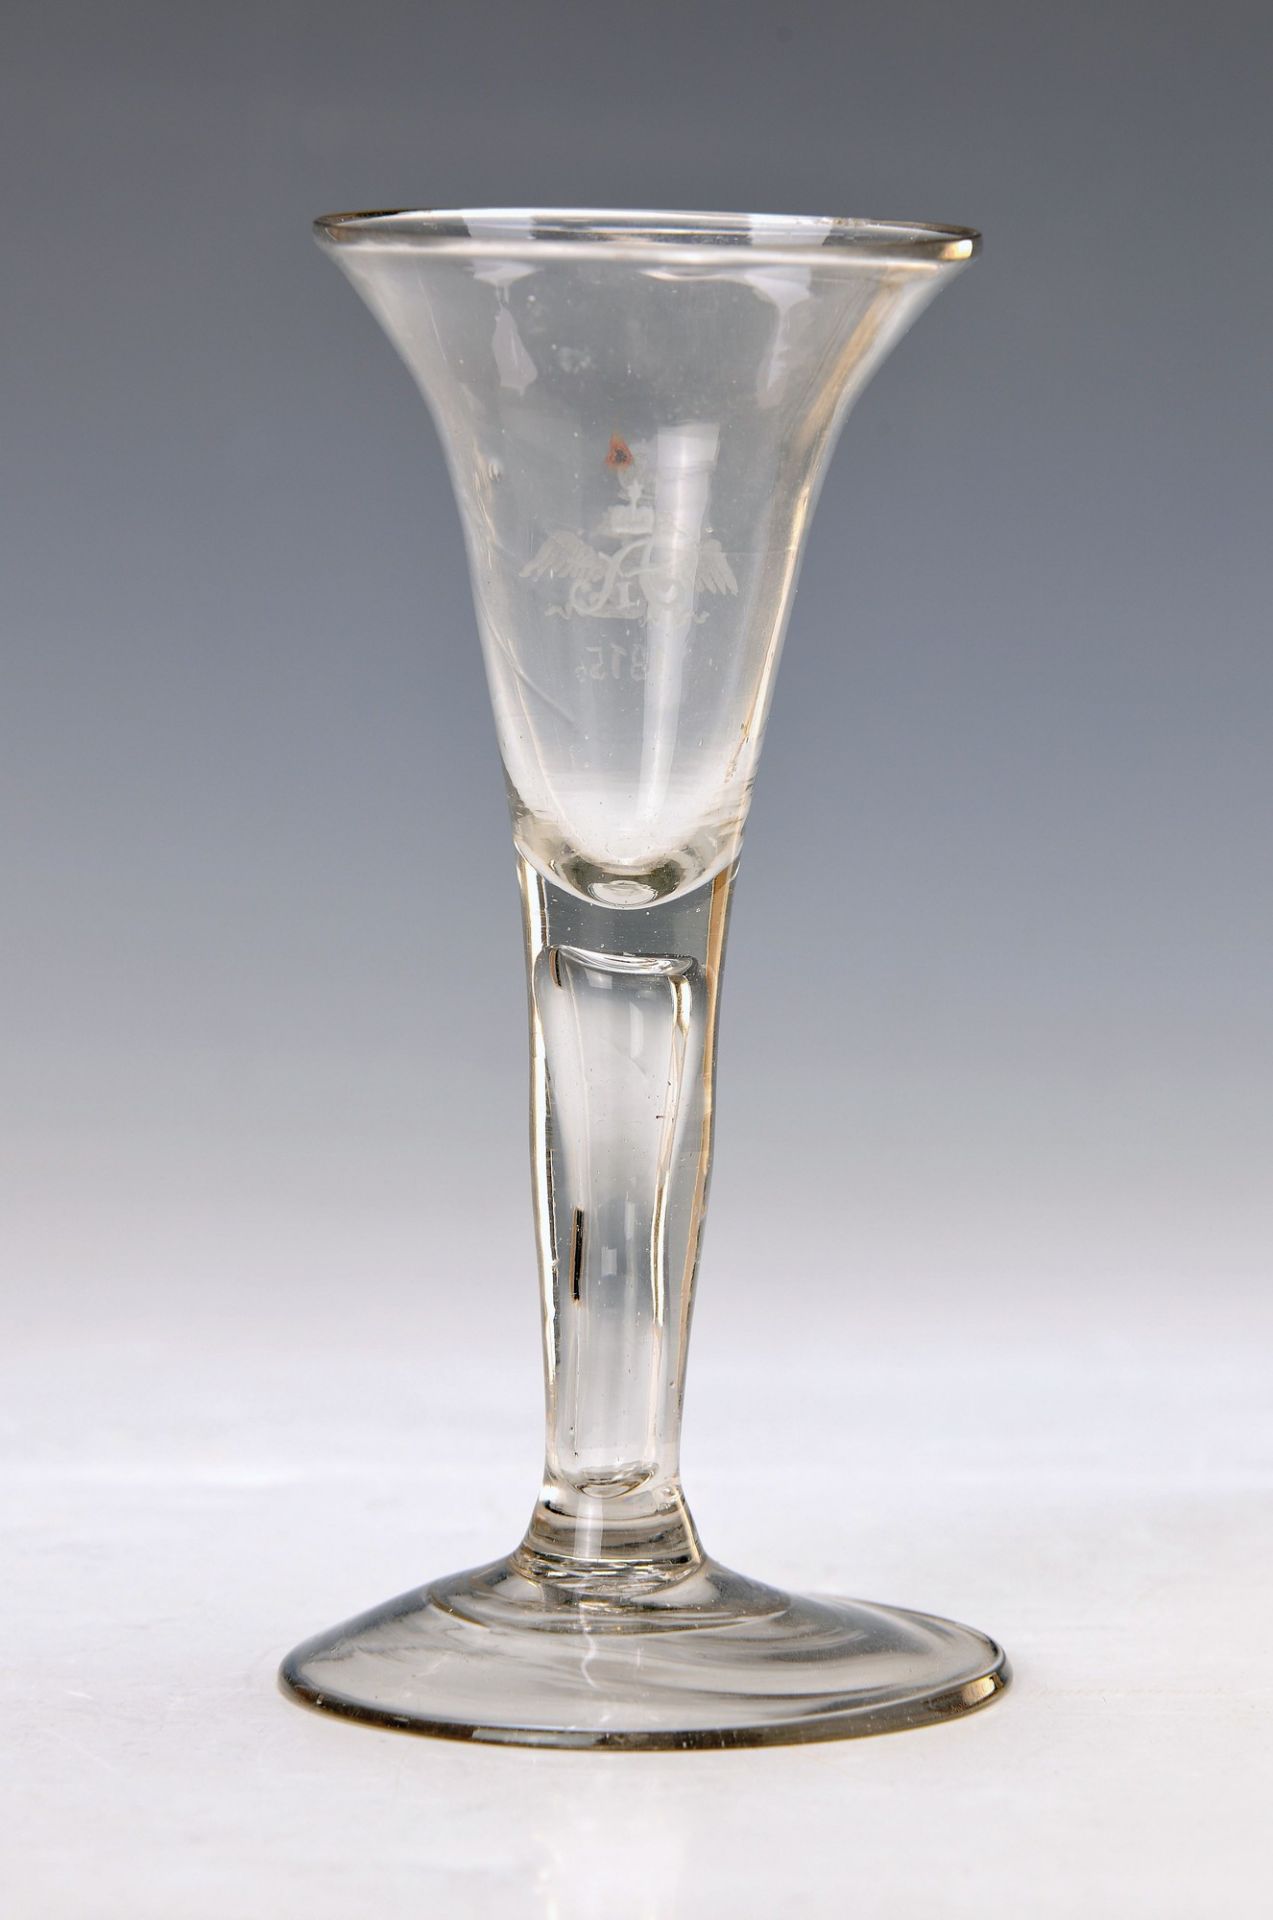 footed glass, St. Petersburg, dat. 1815, with monogram Tsar Alexander (1777-1825), on the rear